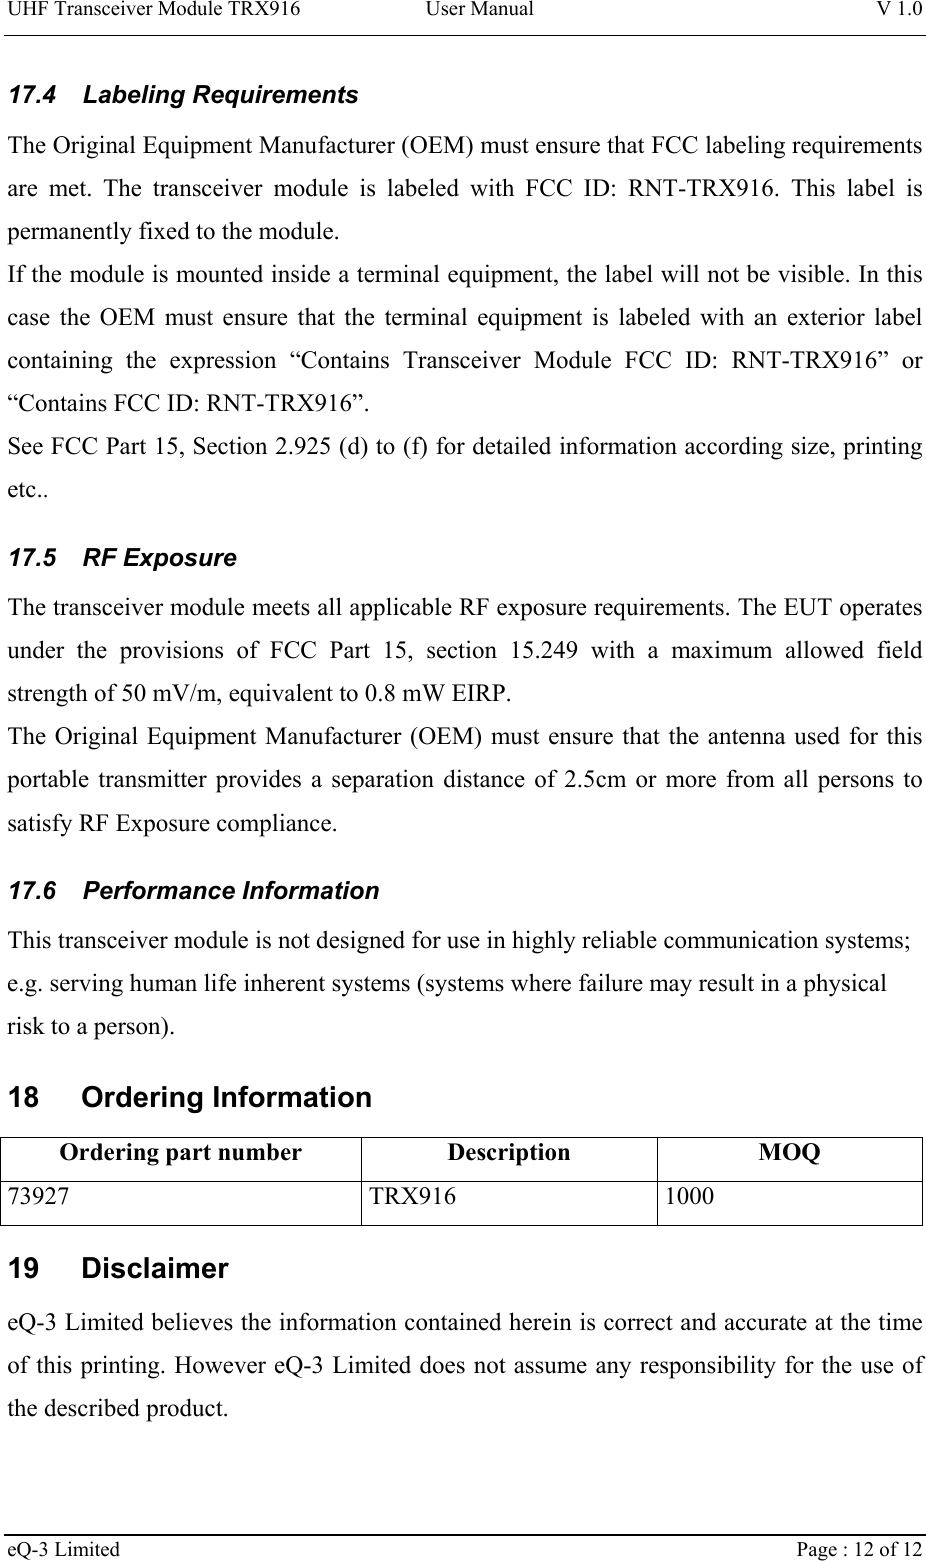 UHF Transceiver Module TRX916 User Manual  V 1.0 eQ-3 Limited    Page : 12 of 12 17.4  Labeling Requirements  The Original Equipment Manufacturer (OEM) must ensure that FCC labeling requirements are met. The transceiver module is labeled with FCC ID: RNT-TRX916. This label is permanently fixed to the module.  If the module is mounted inside a terminal equipment, the label will not be visible. In this case the OEM must ensure that the terminal equipment is labeled with an exterior label containing the expression “Contains Transceiver Module FCC ID: RNT-TRX916” or “Contains FCC ID: RNT-TRX916”. See FCC Part 15, Section 2.925 (d) to (f) for detailed information according size, printing etc.. 17.5  RF Exposure  The transceiver module meets all applicable RF exposure requirements. The EUT operates under the provisions of FCC Part 15, section 15.249 with a maximum allowed field strength of 50 mV/m, equivalent to 0.8 mW EIRP.  The Original Equipment Manufacturer (OEM) must ensure that the antenna used for this portable transmitter provides a separation distance of 2.5cm or more from all persons to satisfy RF Exposure compliance.  17.6  Performance Information  This transceiver module is not designed for use in highly reliable communication systems; e.g. serving human life inherent systems (systems where failure may result in a physical risk to a person). 18 Ordering Information Ordering part number  Description  MOQ 73927 TRX916 1000 19 Disclaimer eQ-3 Limited believes the information contained herein is correct and accurate at the time of this printing. However eQ-3 Limited does not assume any responsibility for the use of the described product. 